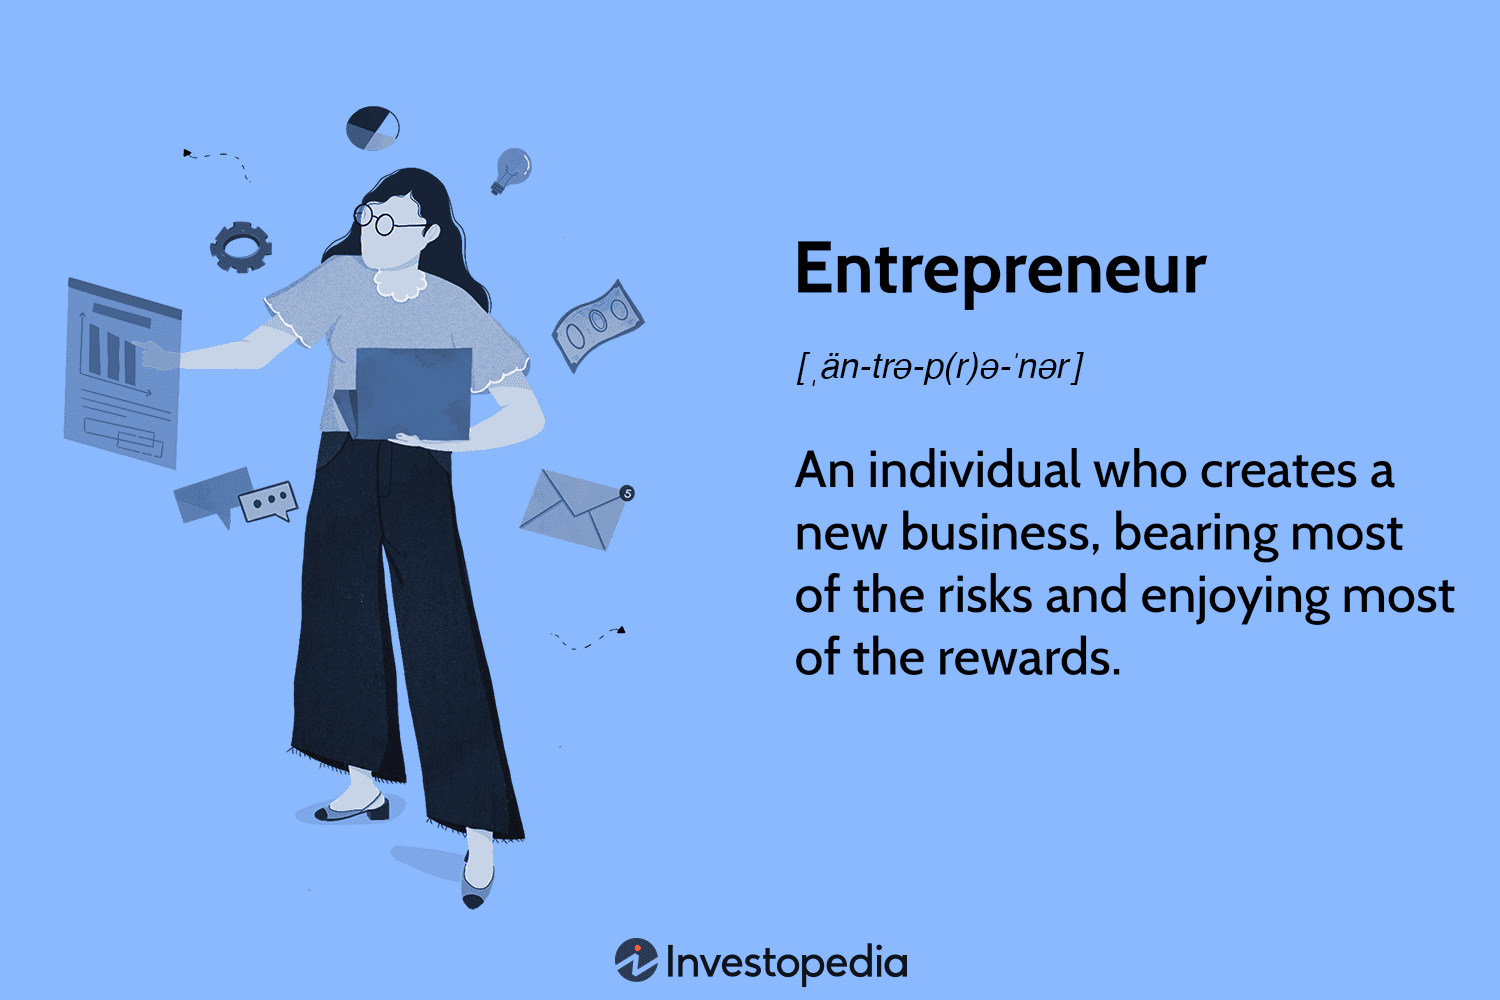 Who is an Entrepreneur?